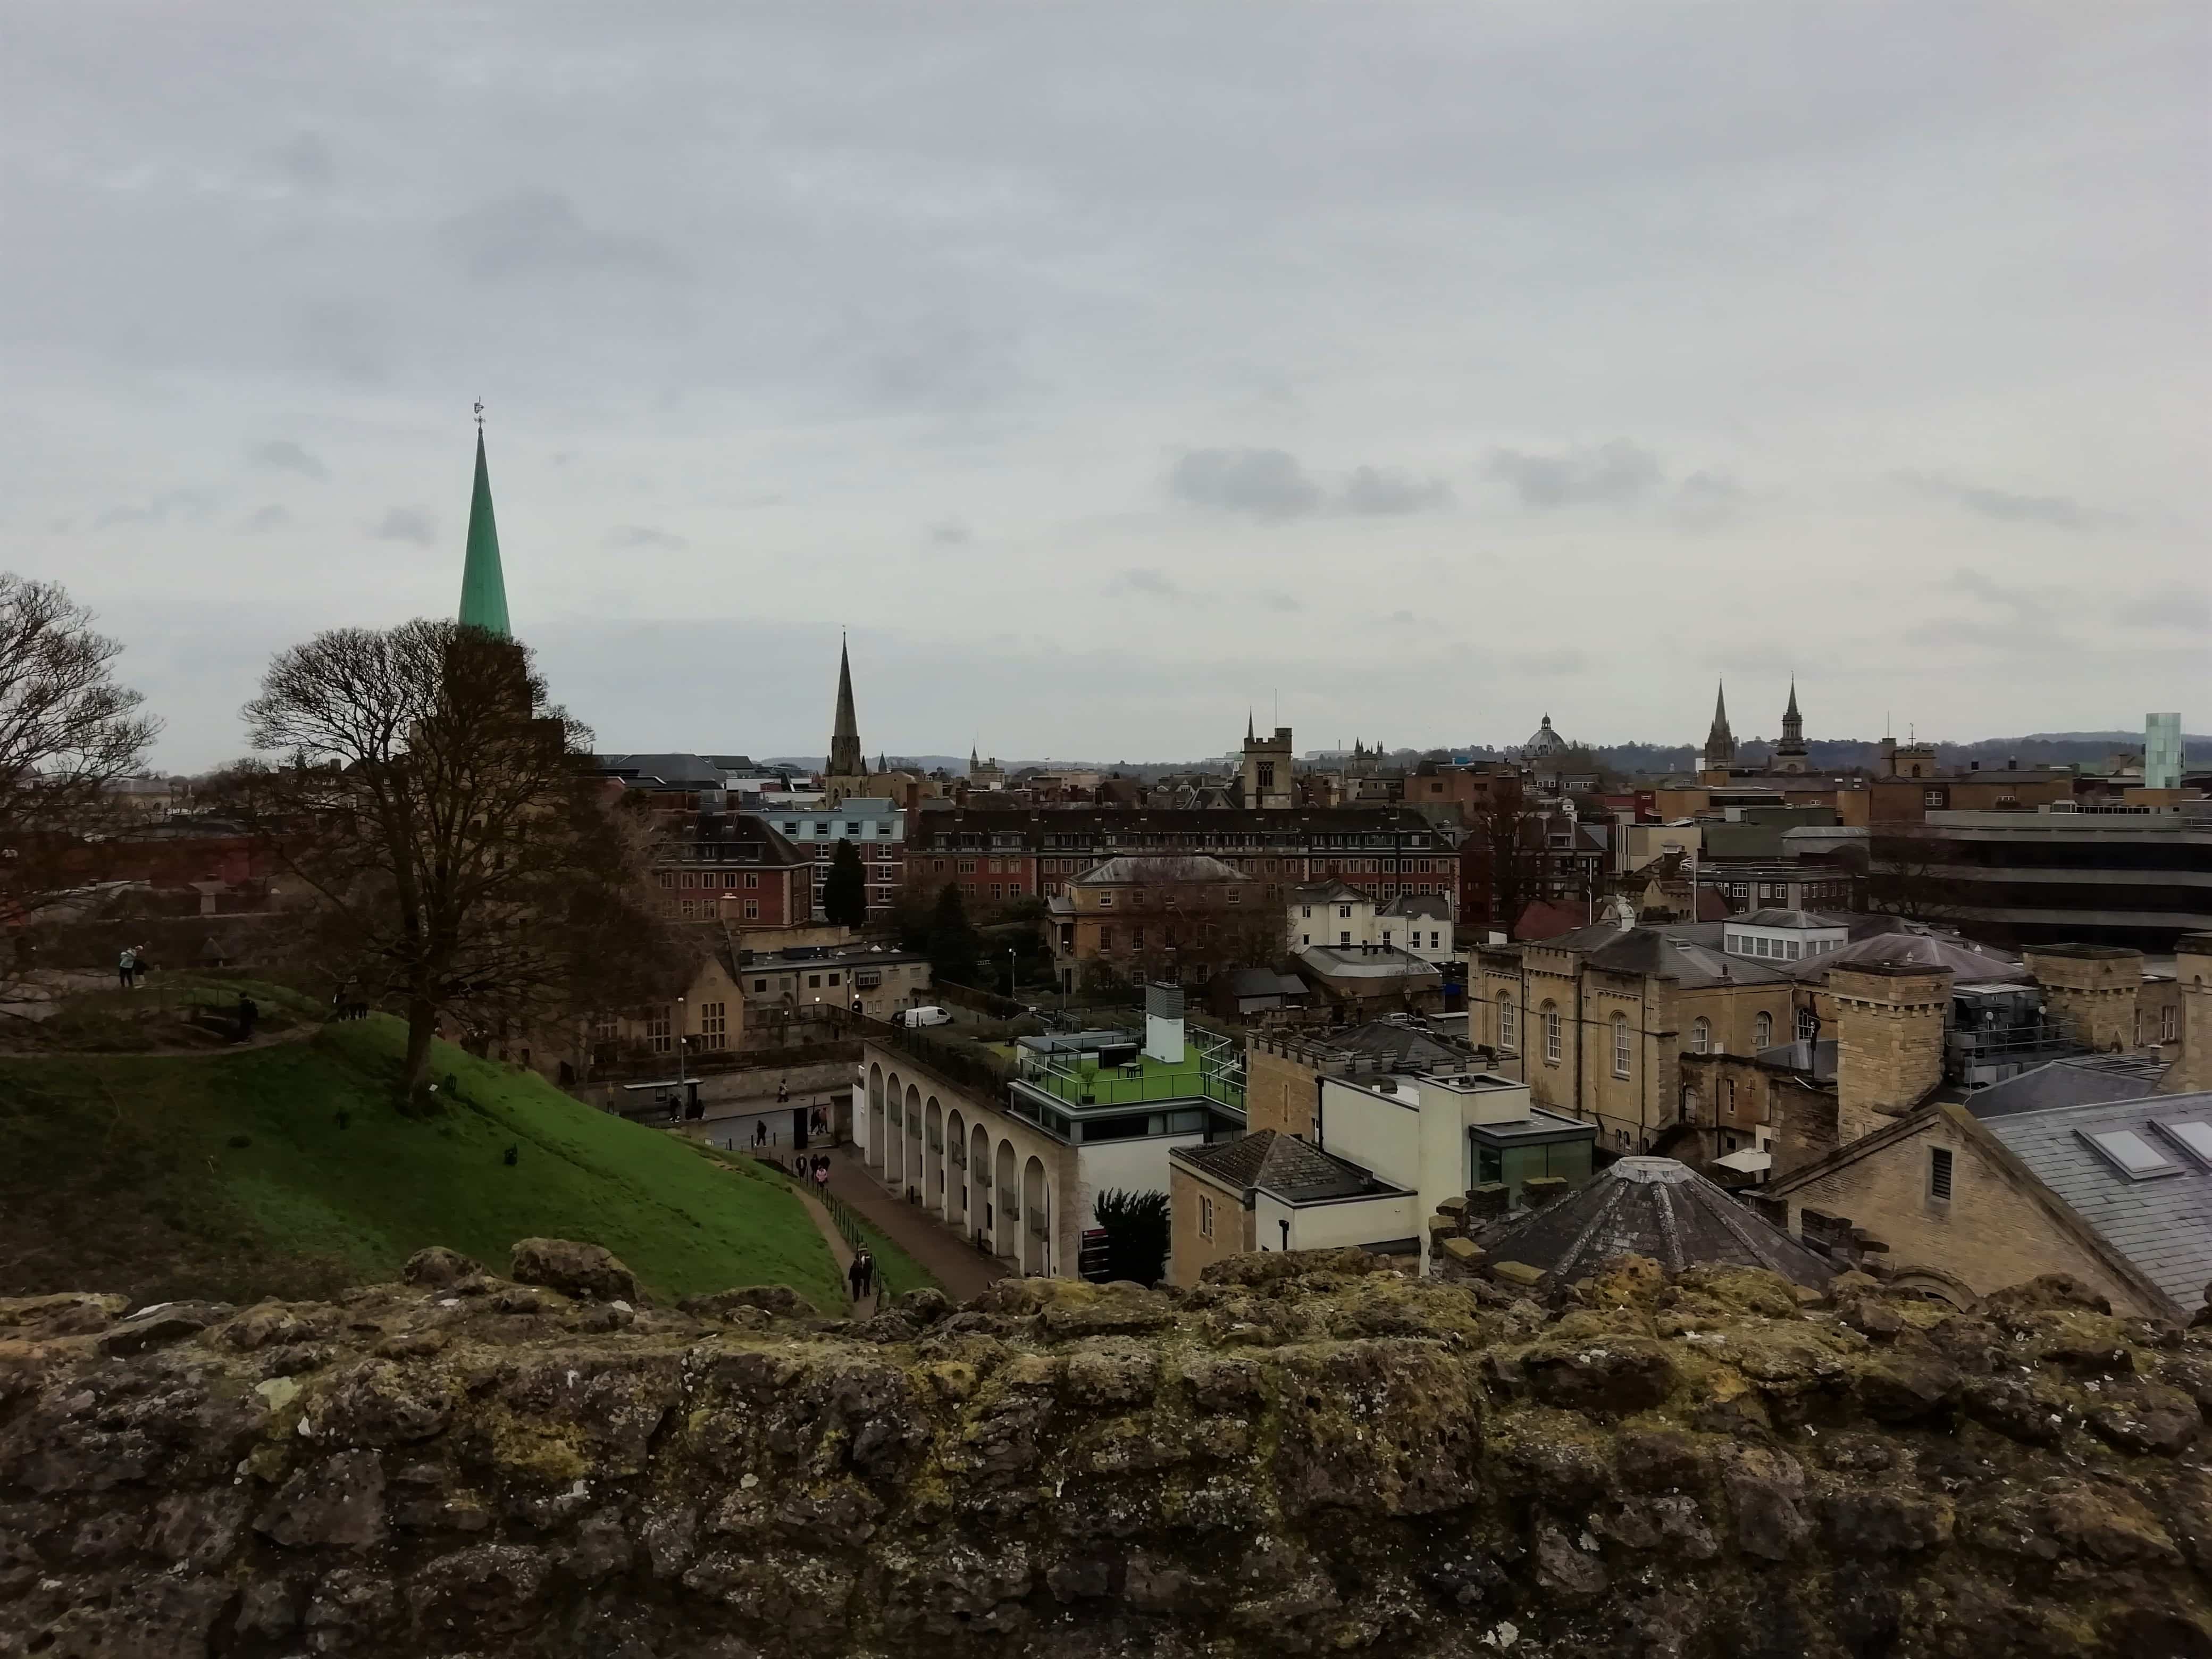 View over Oxford from the Castle Mound